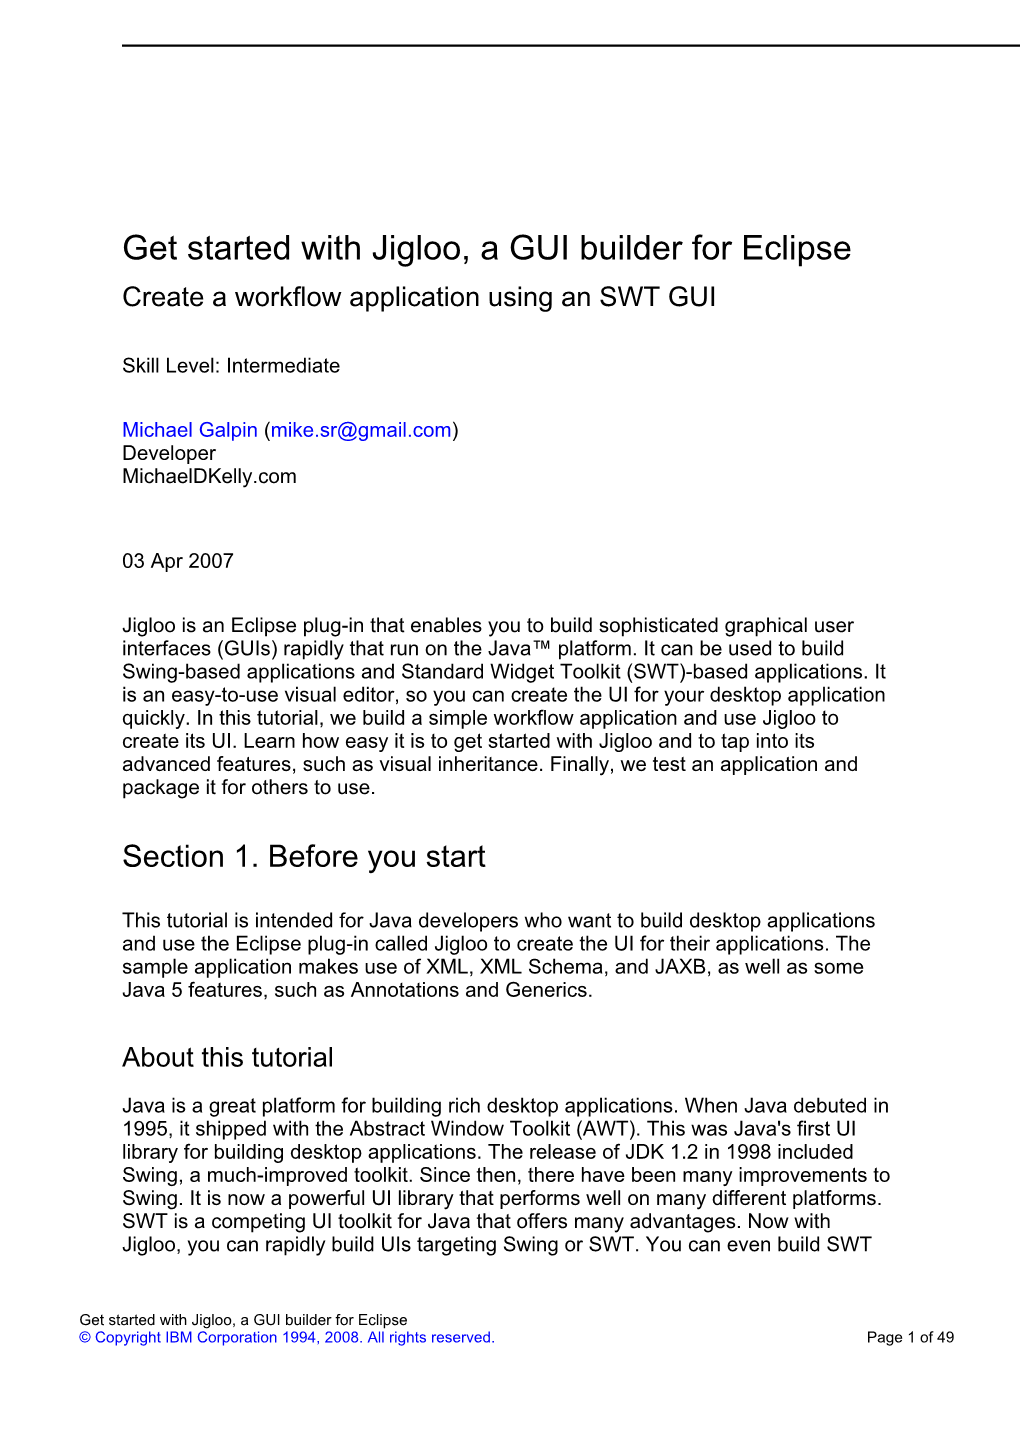 Get Started with Jigloo, a GUI Builder for Eclipse Create a Workflow Application Using an SWT GUI